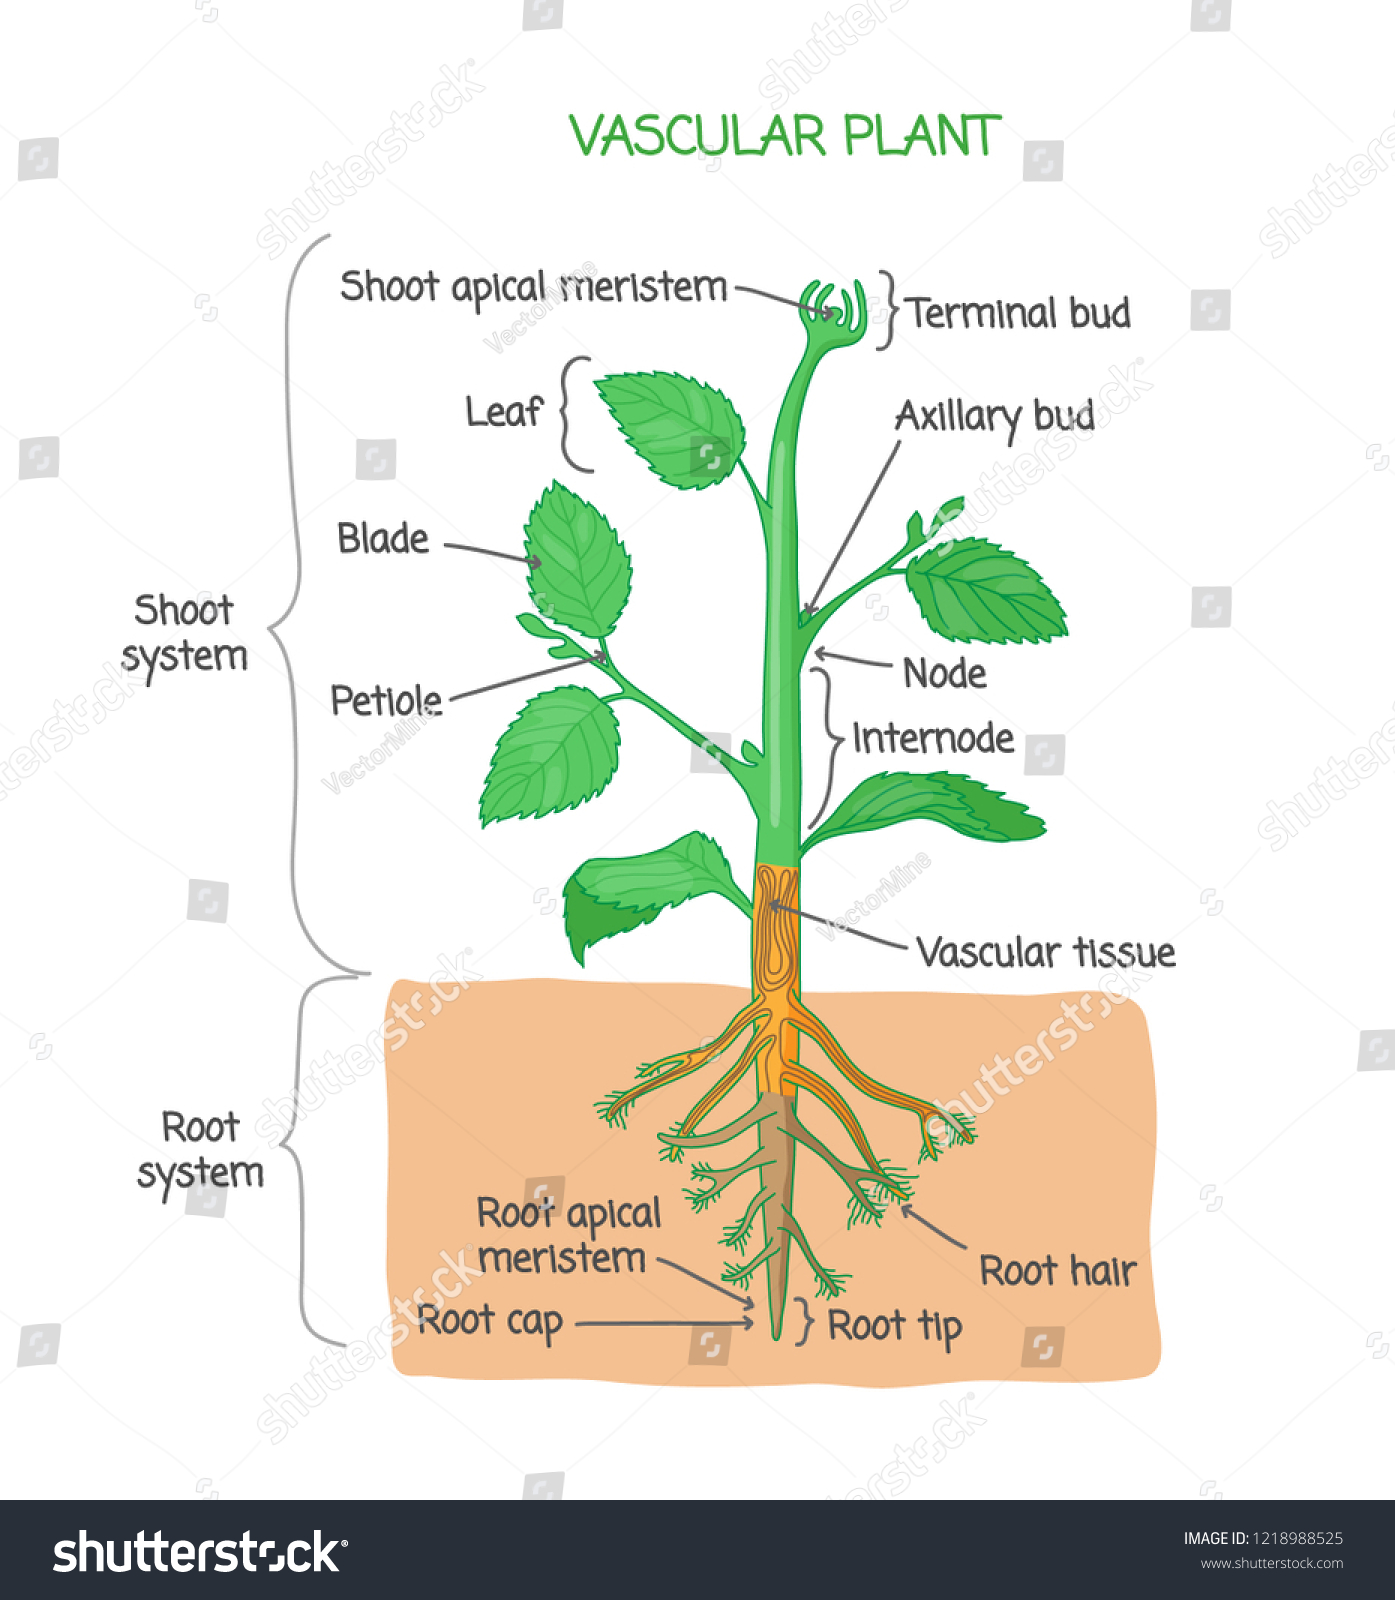 Vascular plant biological structure diagram with labels, vector illustration drawing poster, educational scheme with shoot system, root system and other parts as nodes, leaves, buds and root